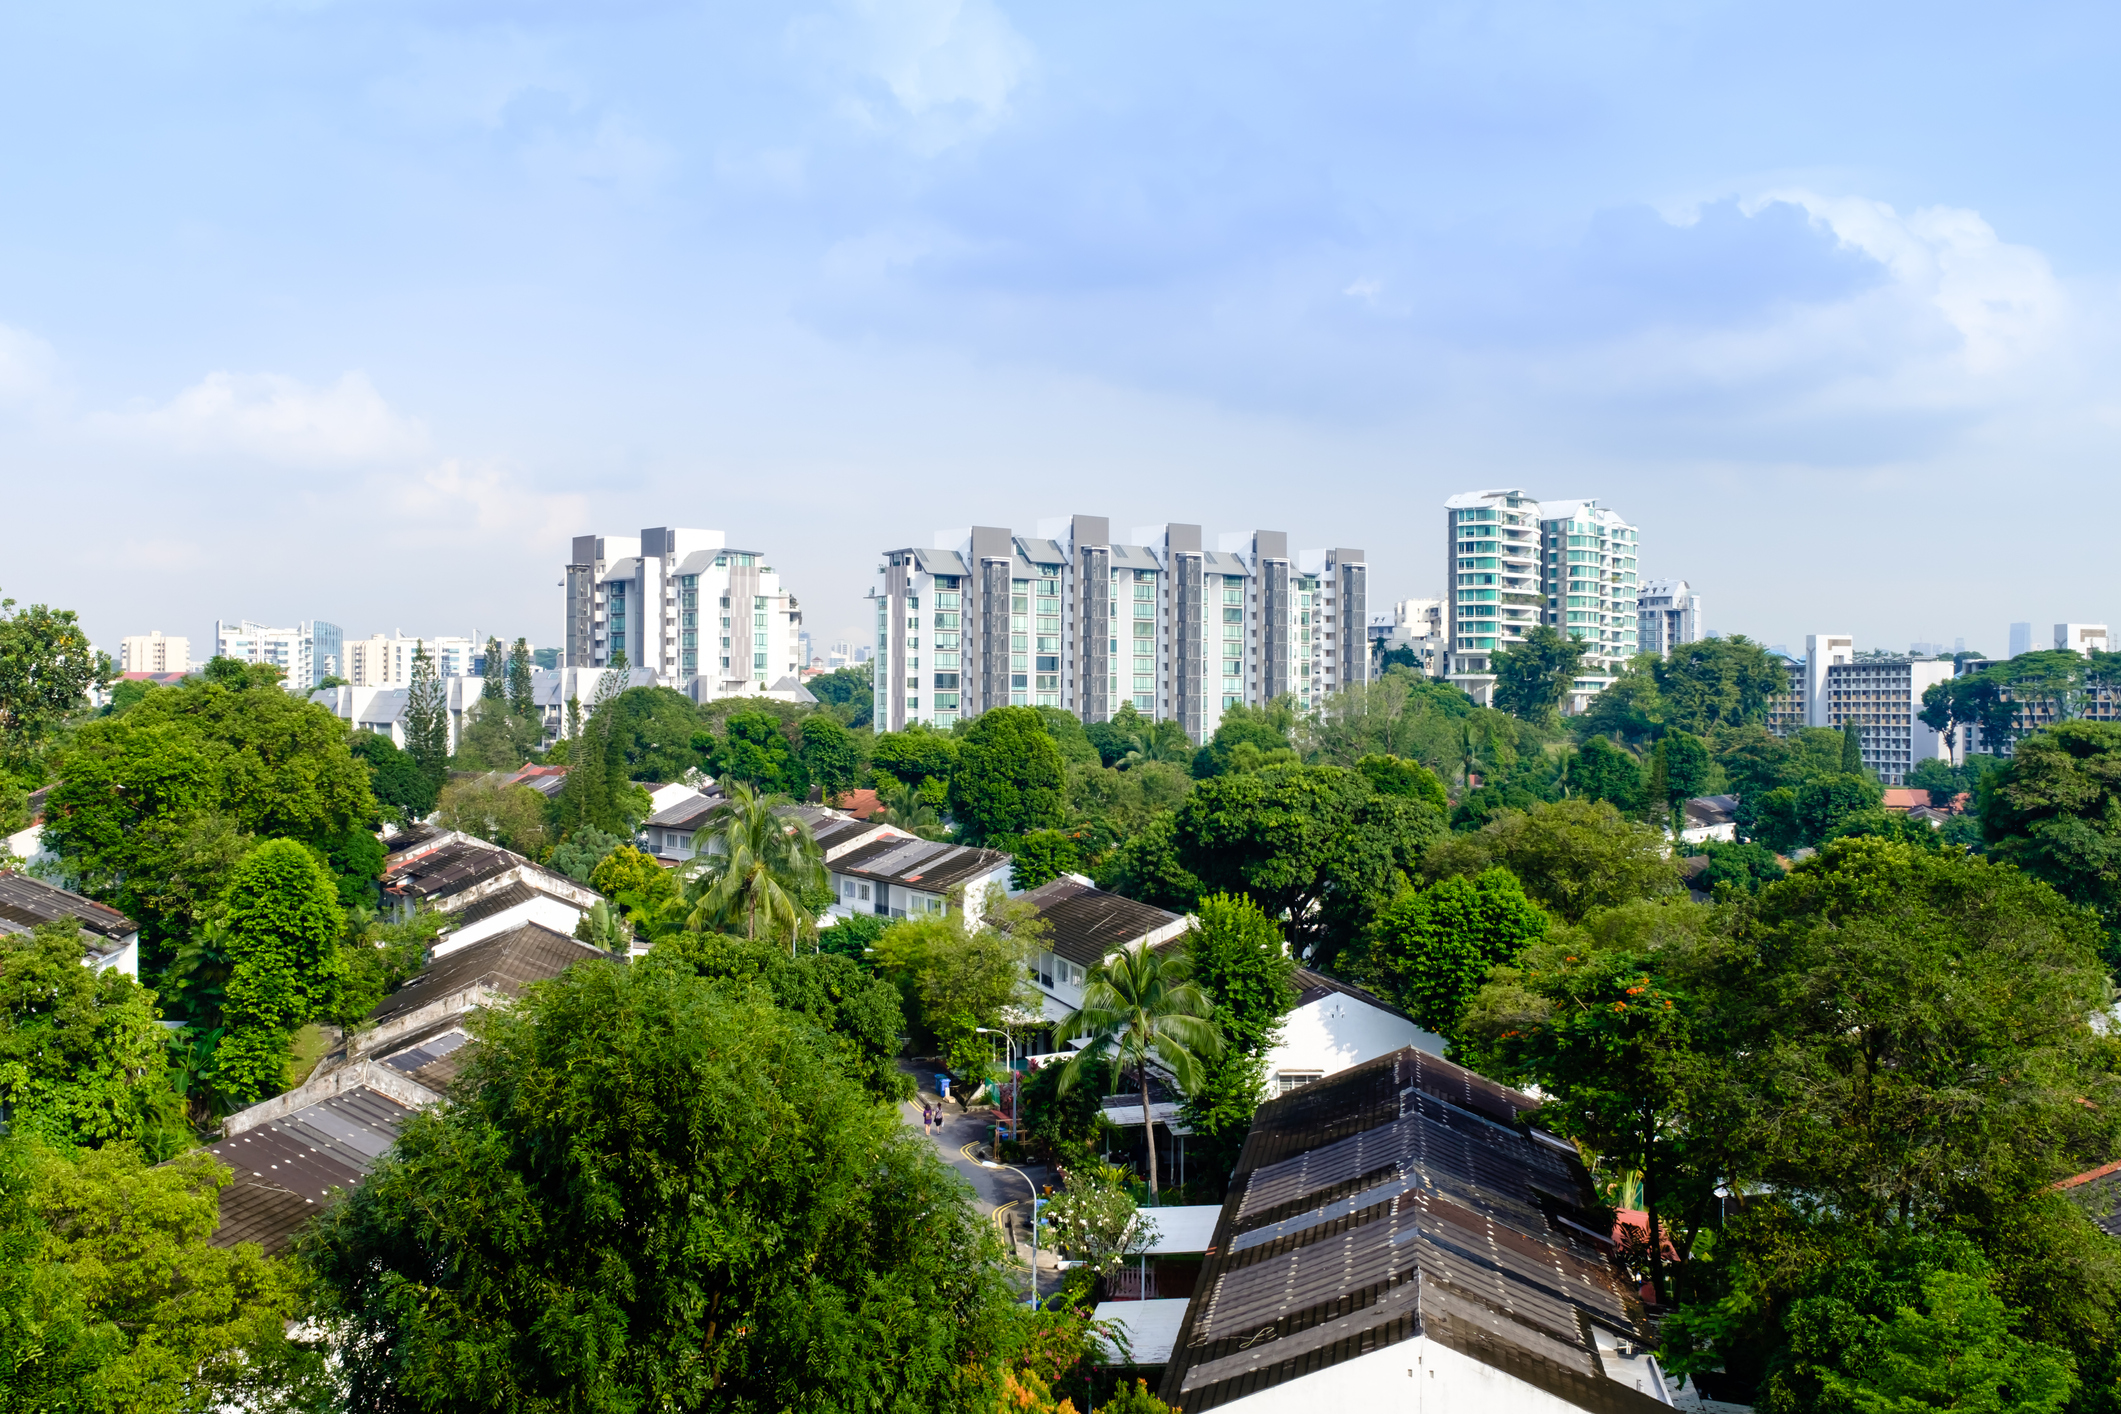 Residential building skyline in forest